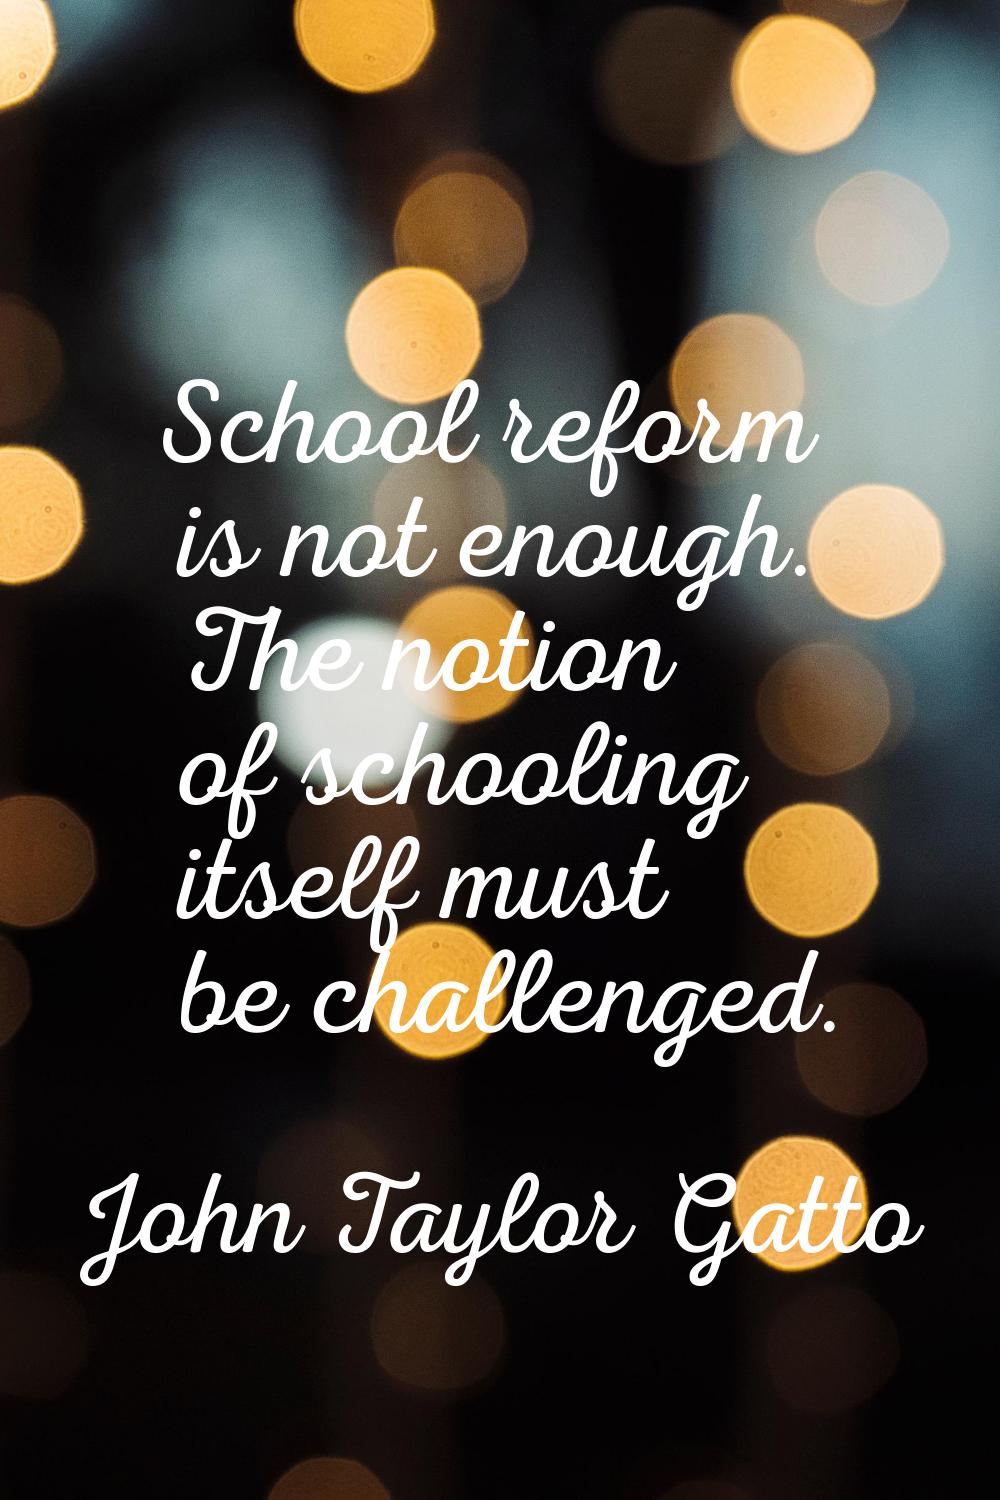 School reform is not enough. The notion of schooling itself must be challenged.